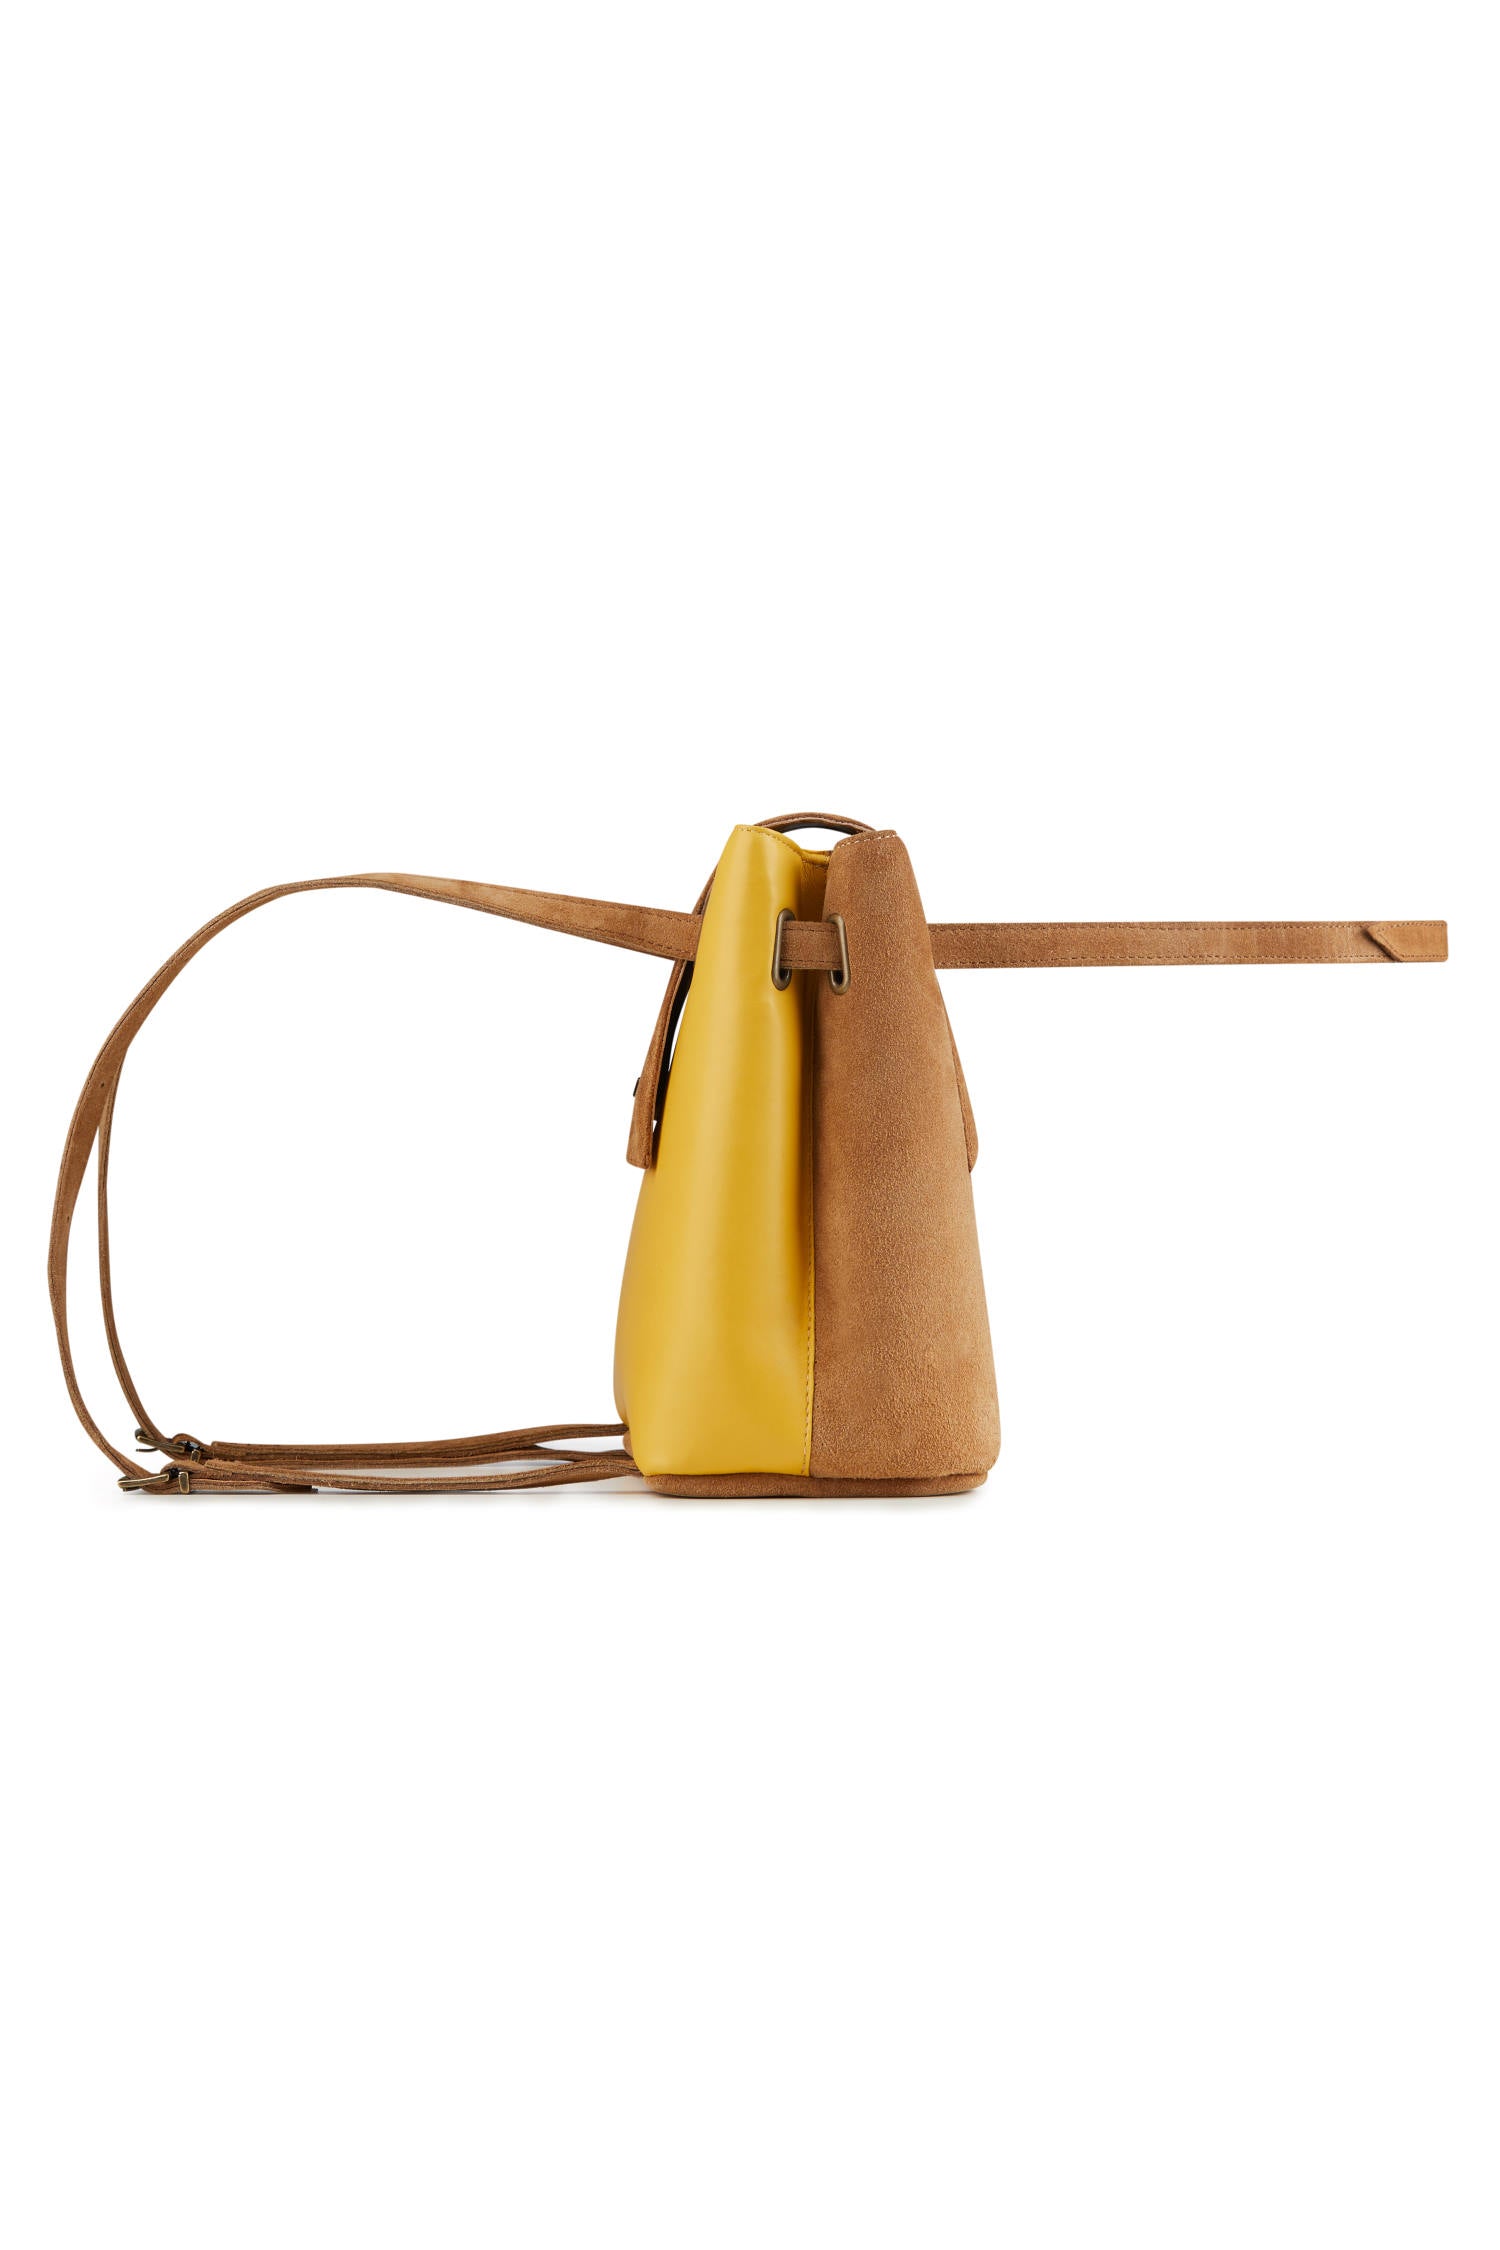 Small backpack in Brown suede | Convertible backpack into shoulder bag ...